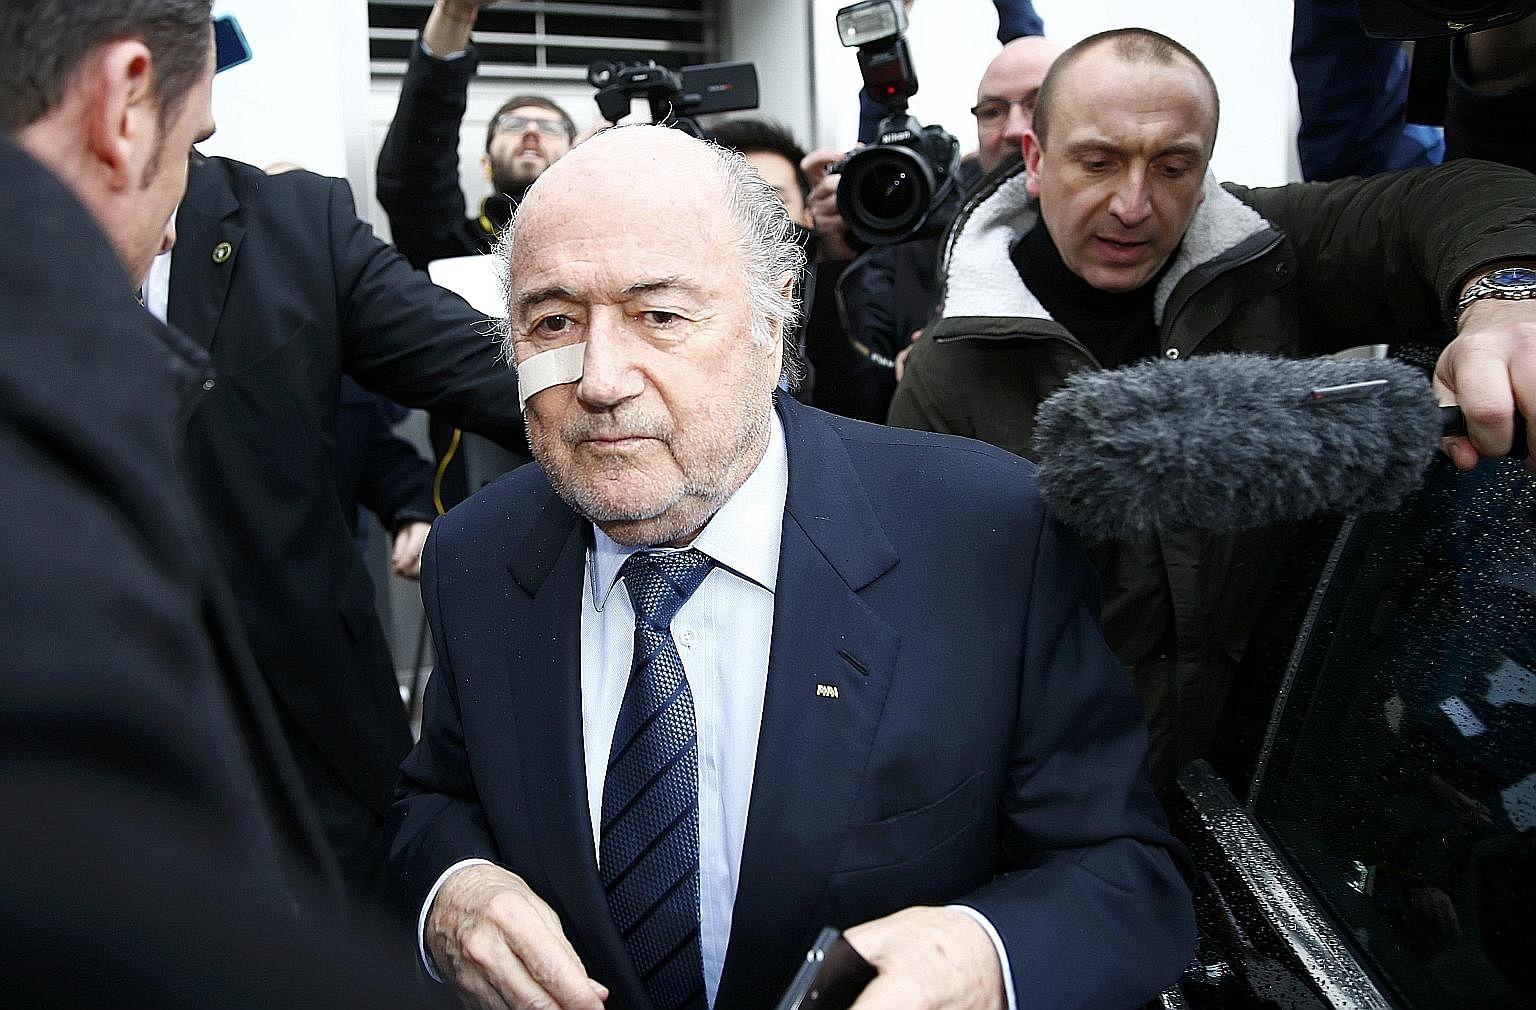 Disgraced former Fifa president Sepp Blatter may have been ousted from his seat at the top of football's governing body, but all five of his potential successors have also been part of a corrupt system that has eschewed transparency from the public e